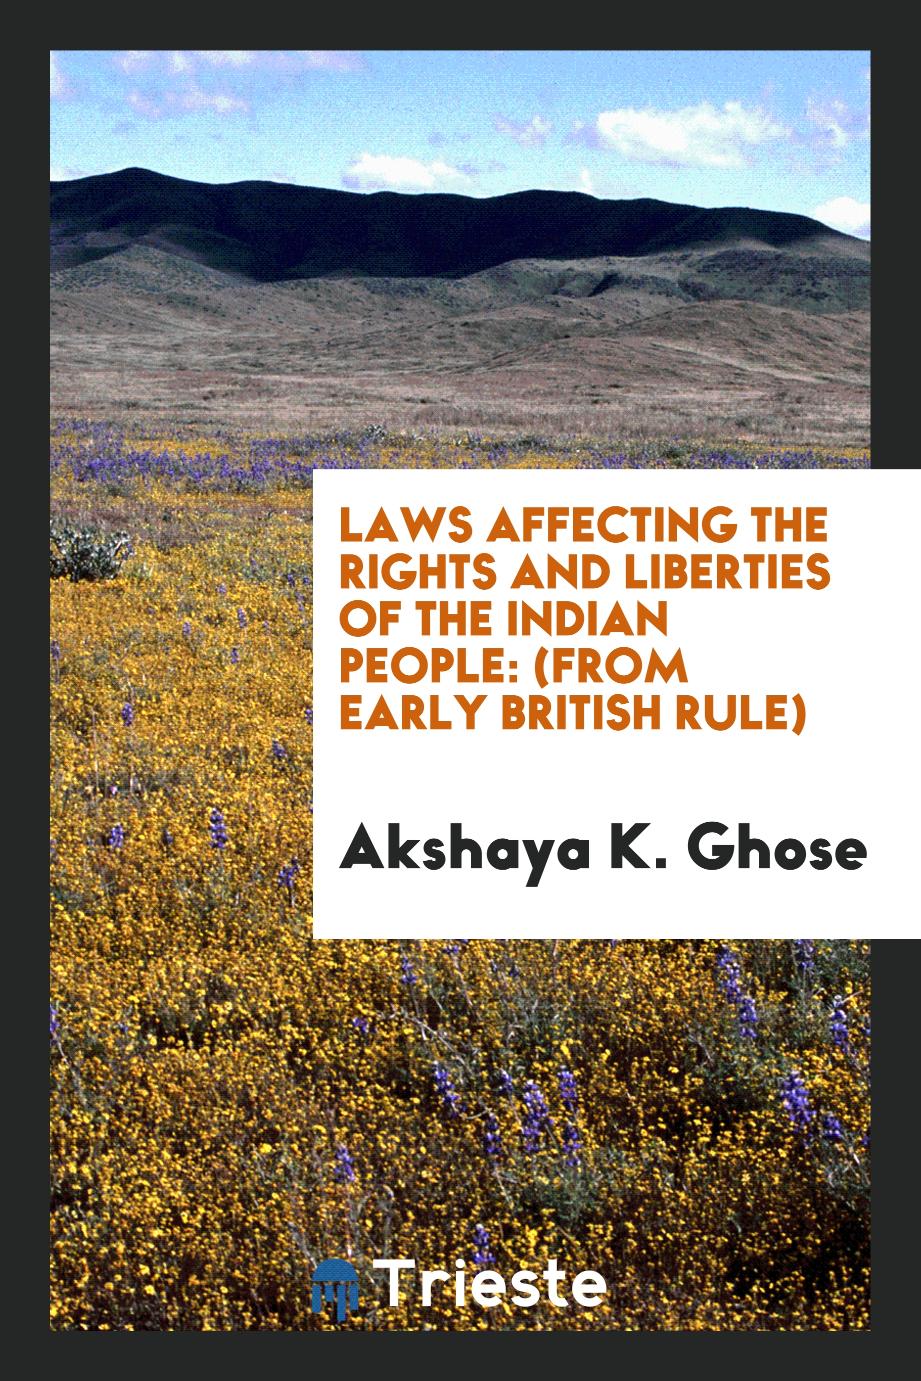 Laws affecting the rights and liberties of the Indian people: (from early British rule)